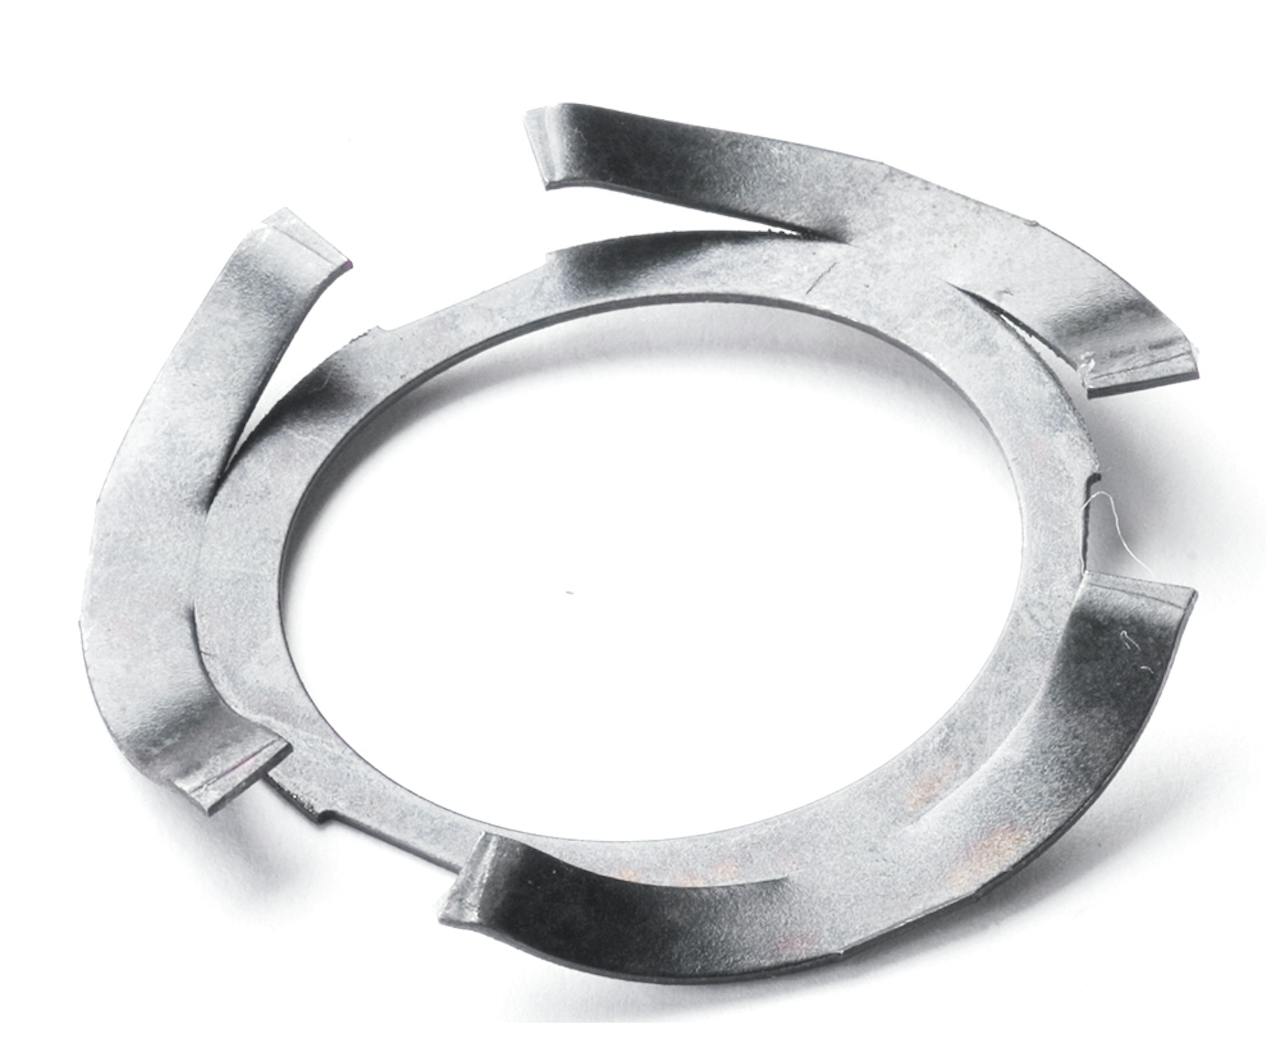 Custom component manufacturing - Finger spring washers